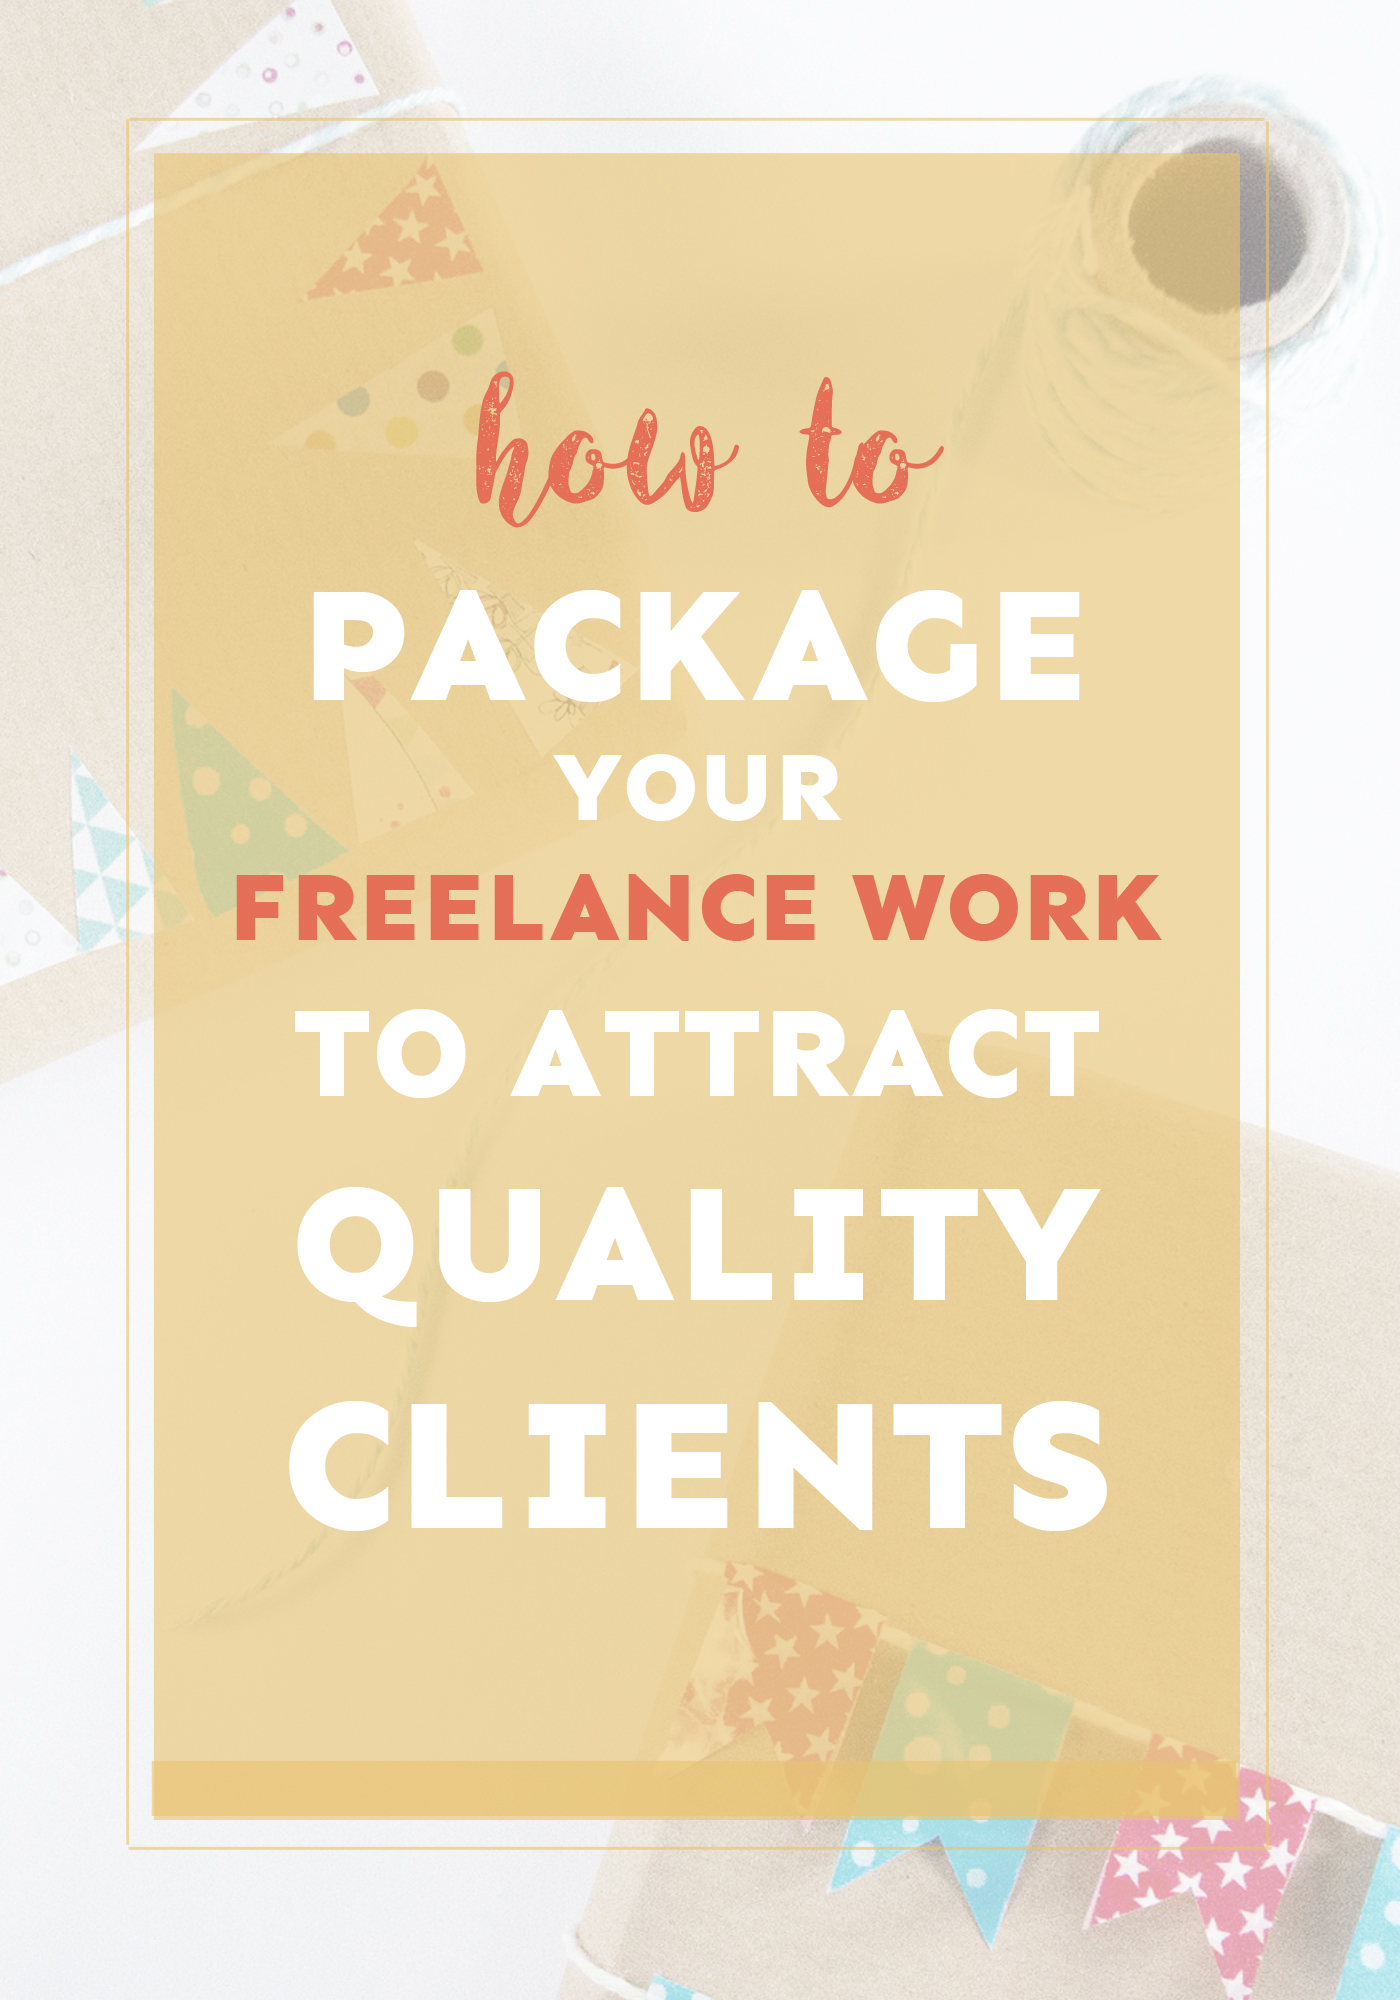 Wondering how to attract better quality clients? Package up your freelance work to make more and find clients you love.